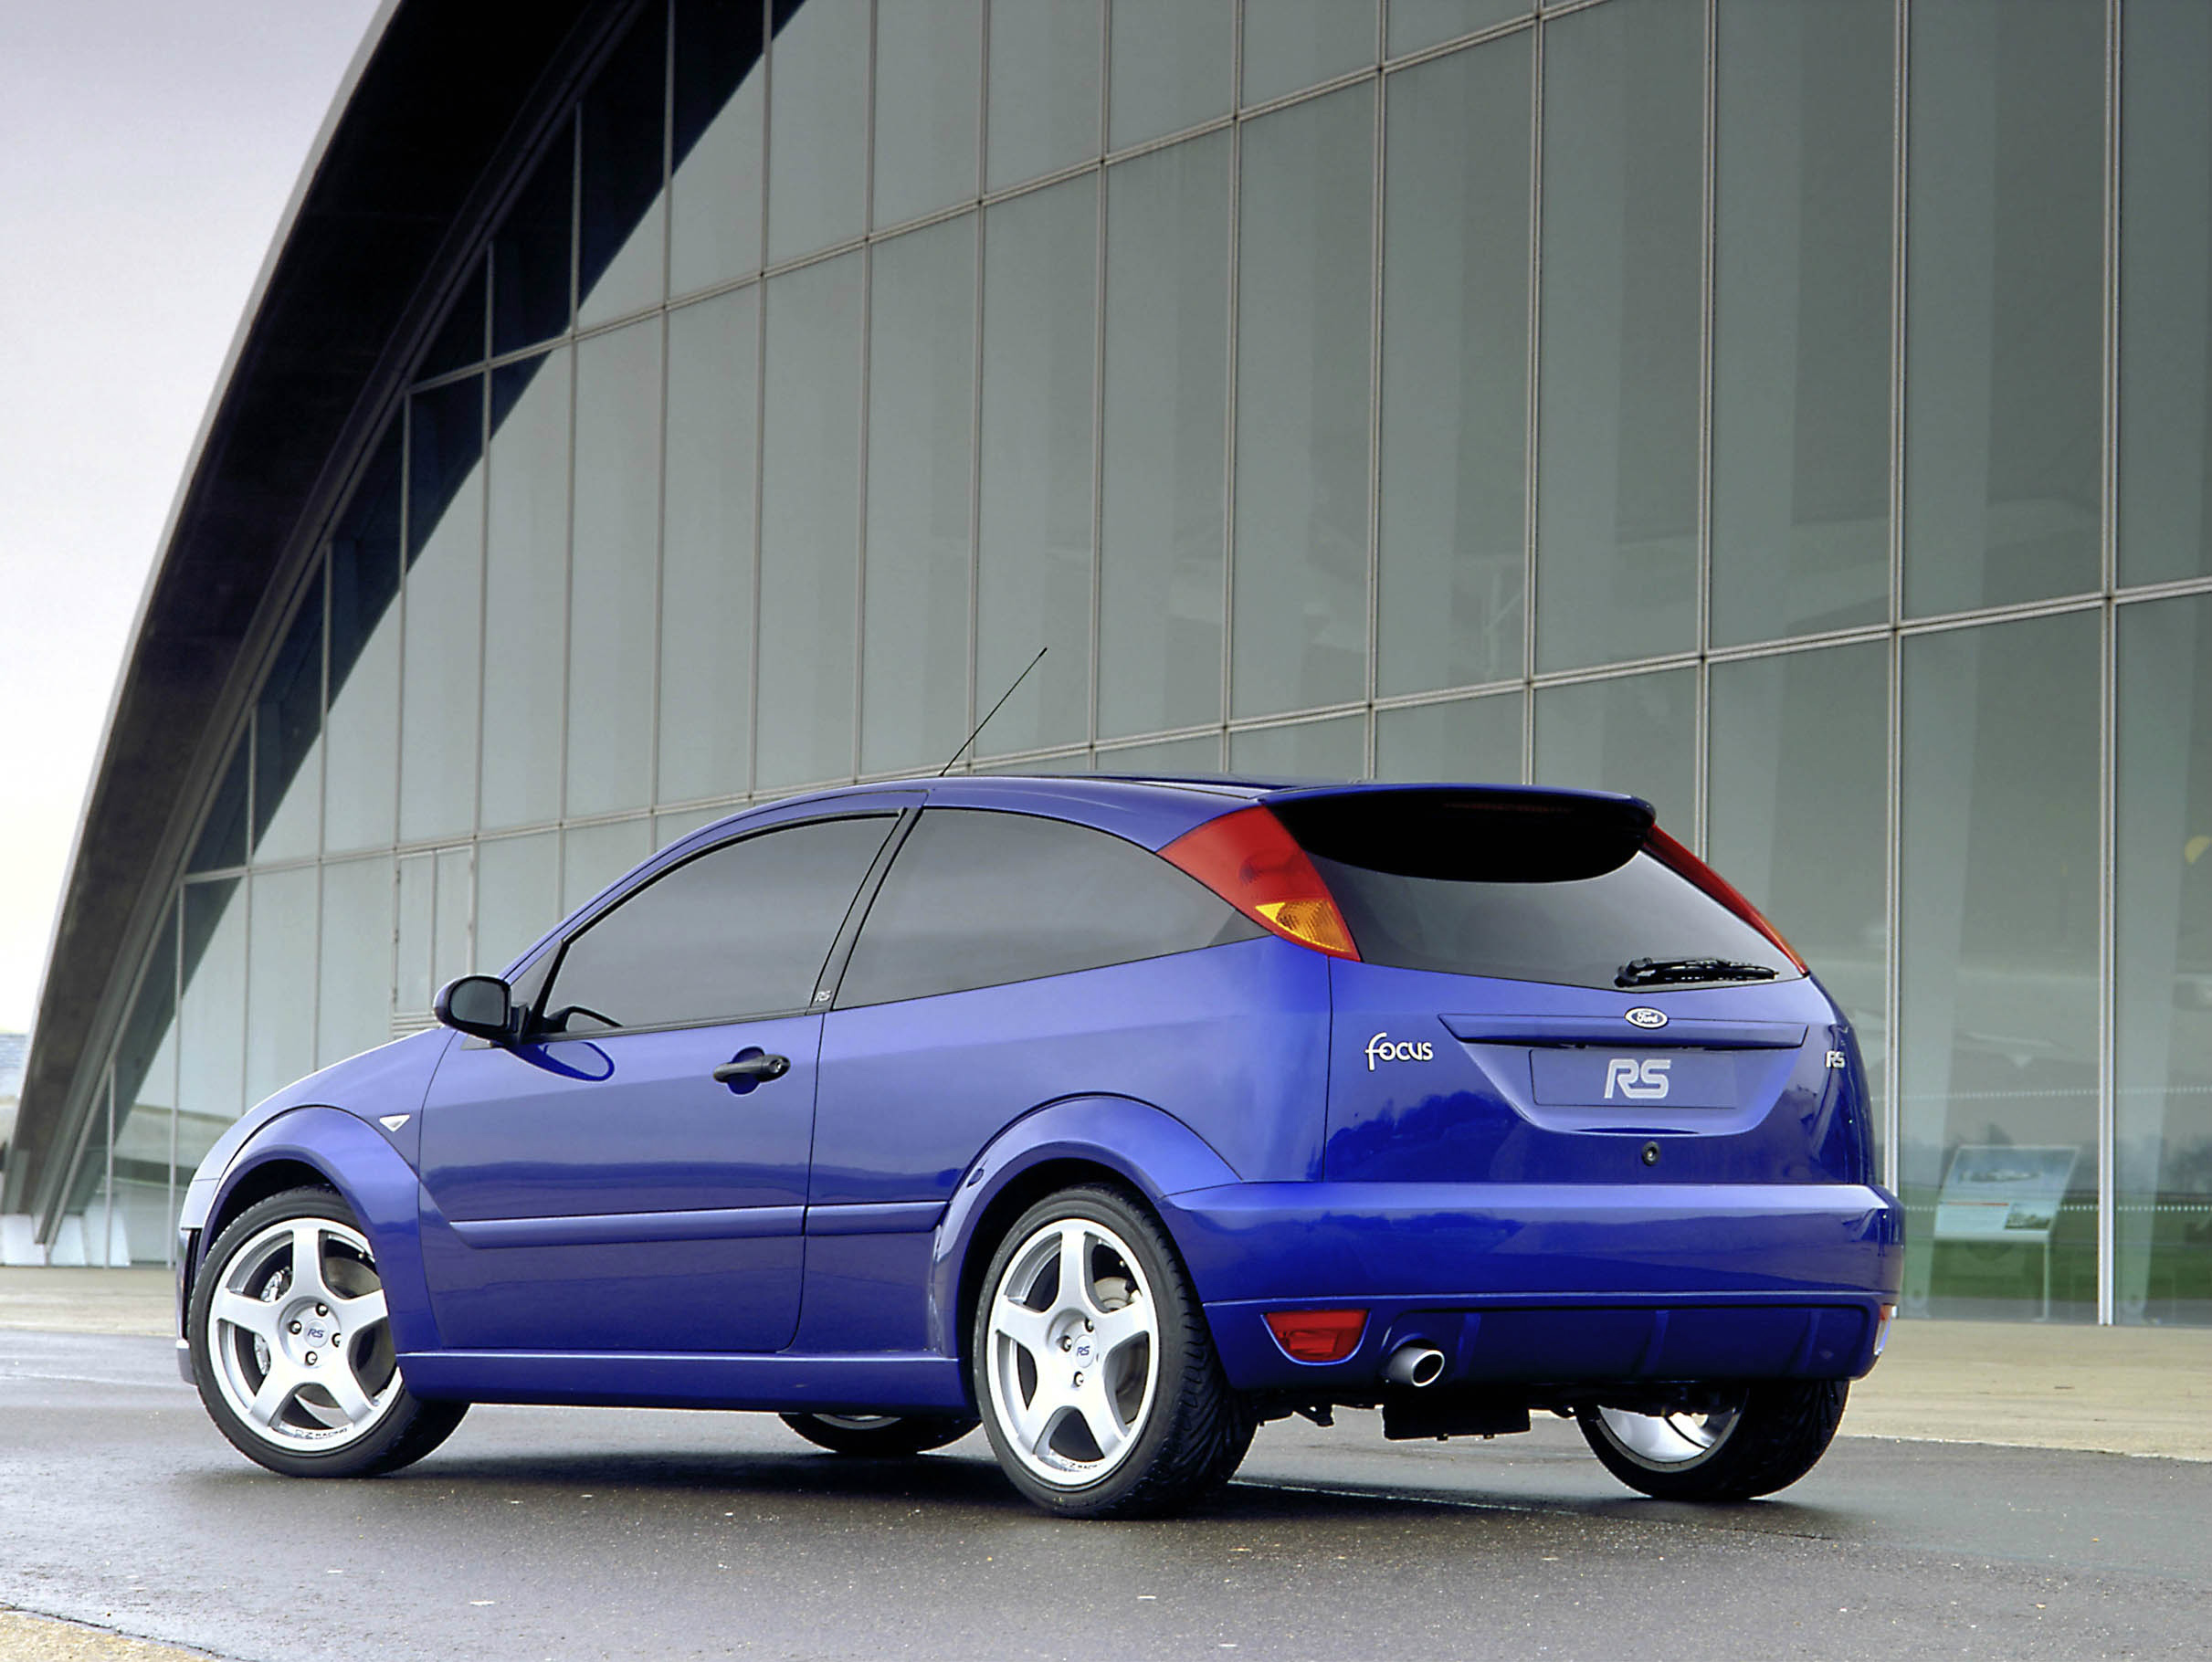 Ford Focus RS MkI and MkII buying guide by The Snday Times Driving